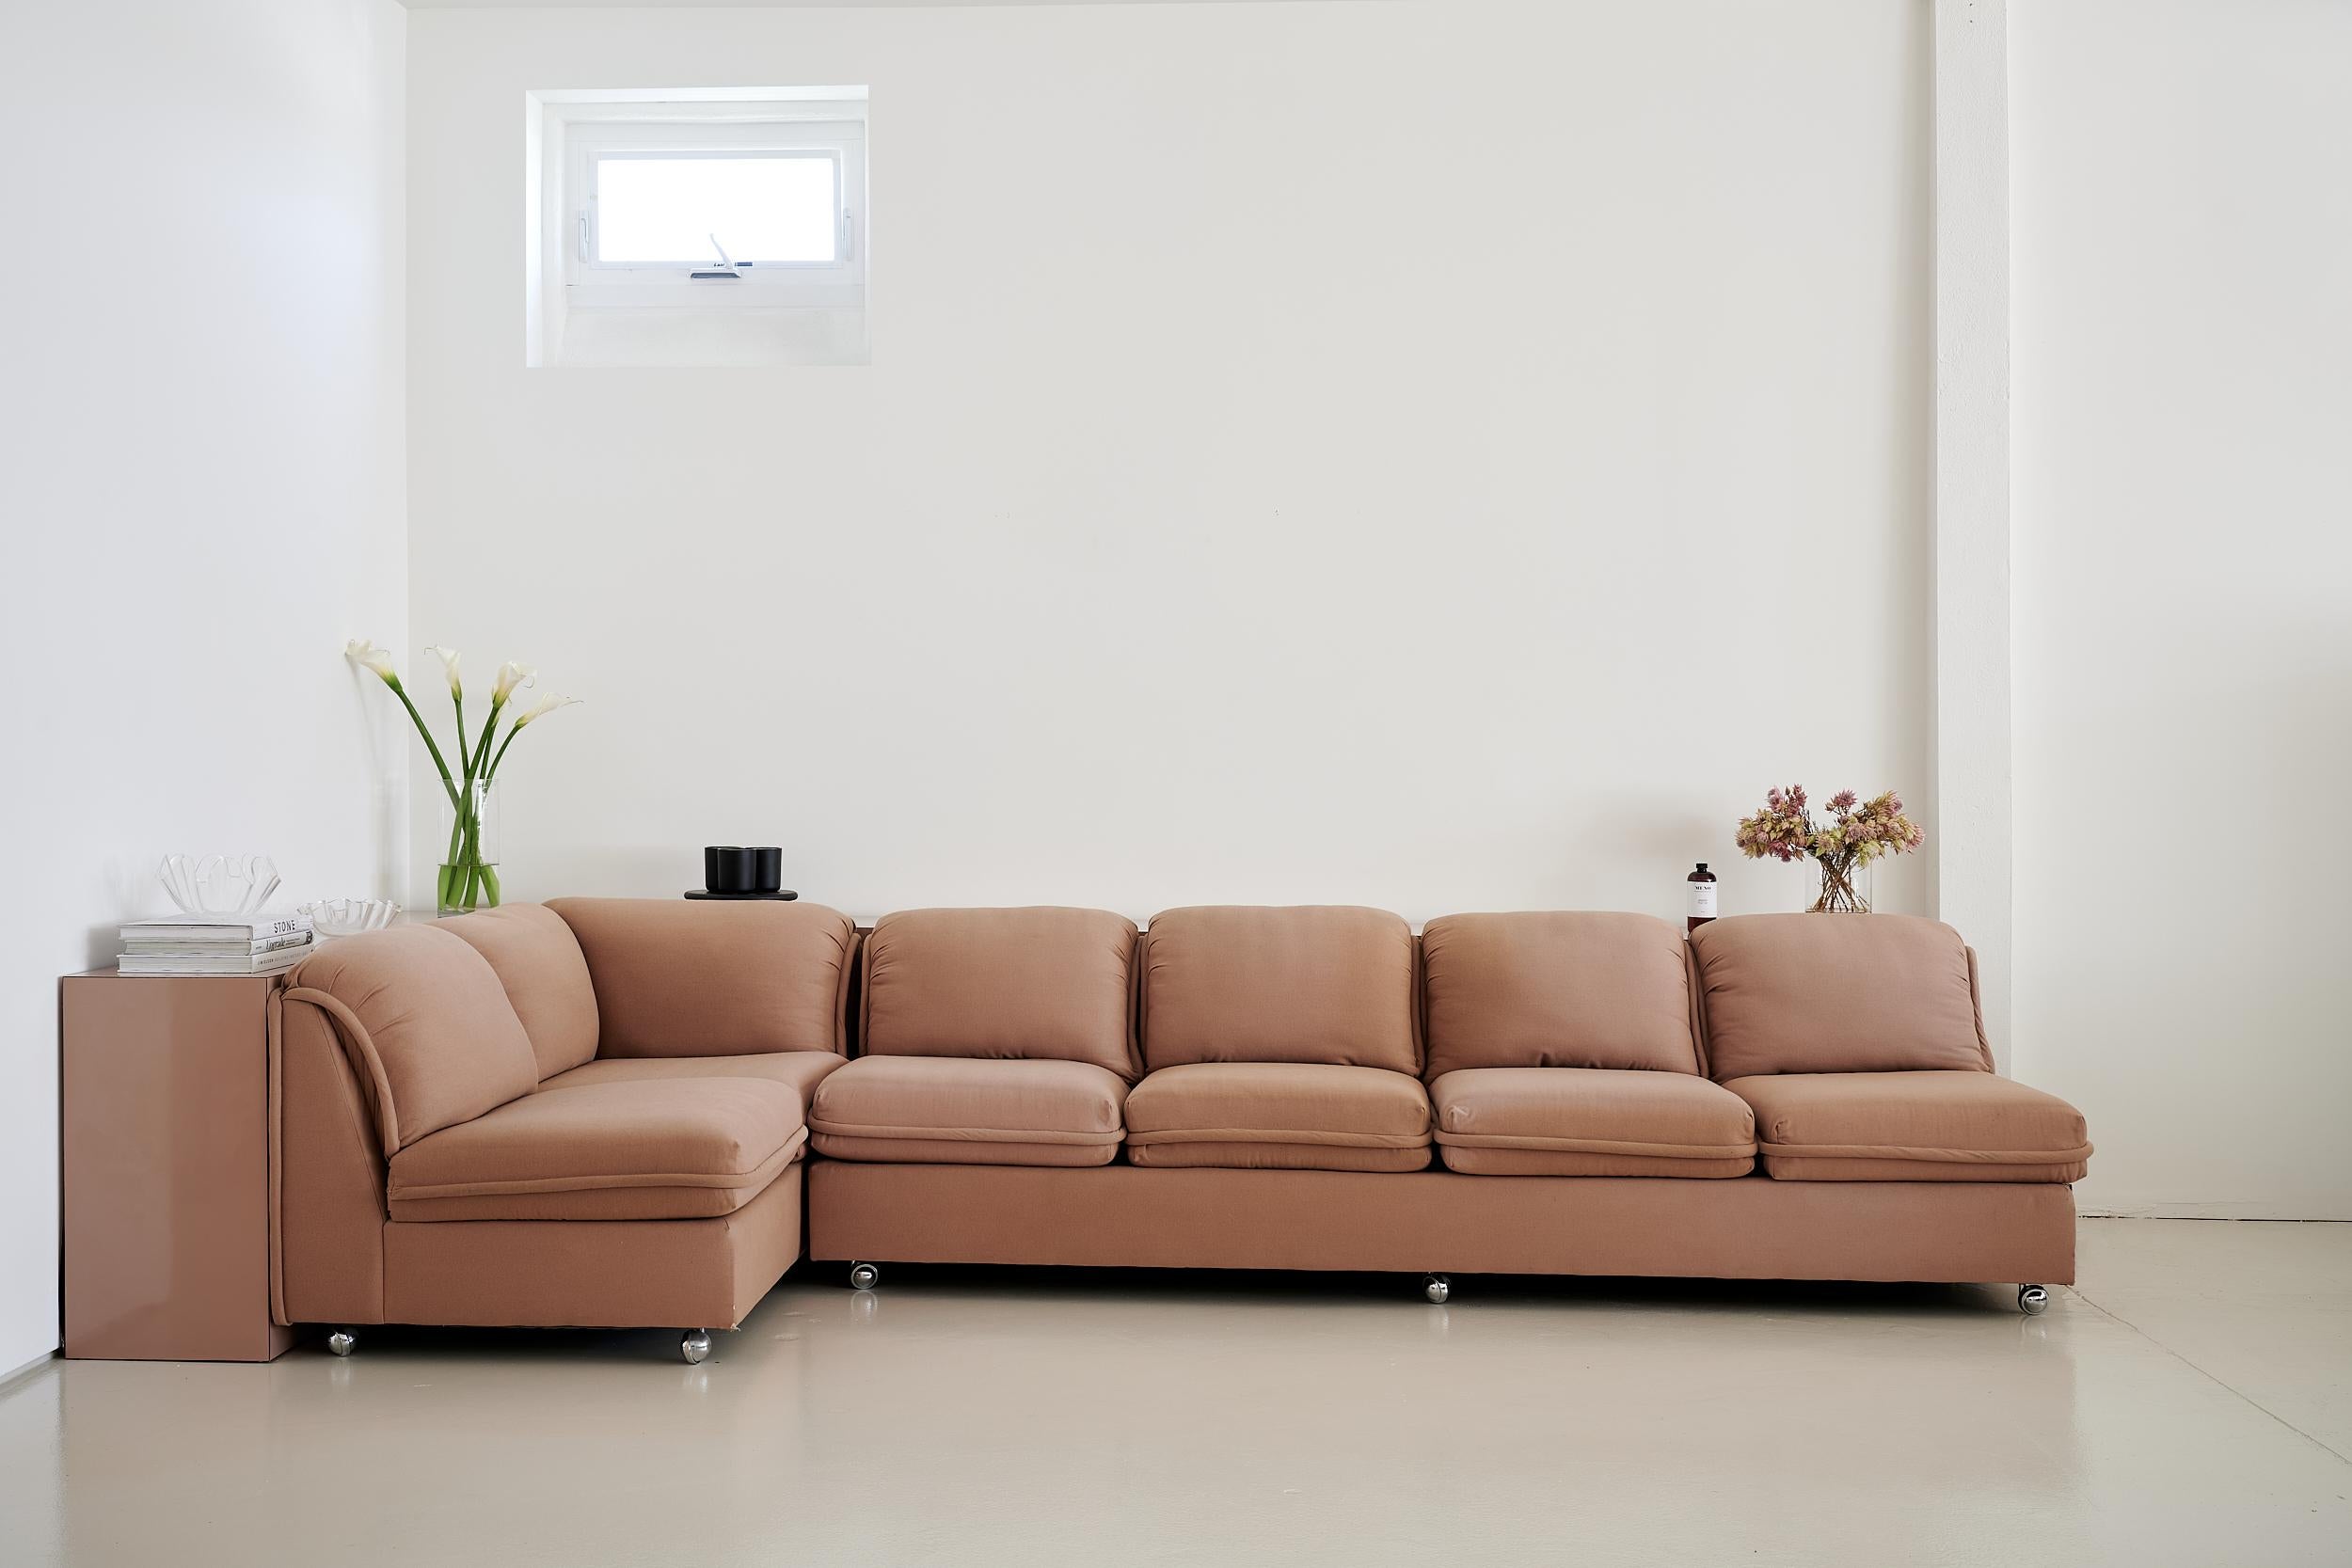 Post Modern style armless sofa sectional manufactured in the USA by Classic Gallery

Sourced from the original, single owner.

Upholstered in sumptuous mauve wool.

Chrome casters.

Two pieces: an armless four-seater and a left-hand